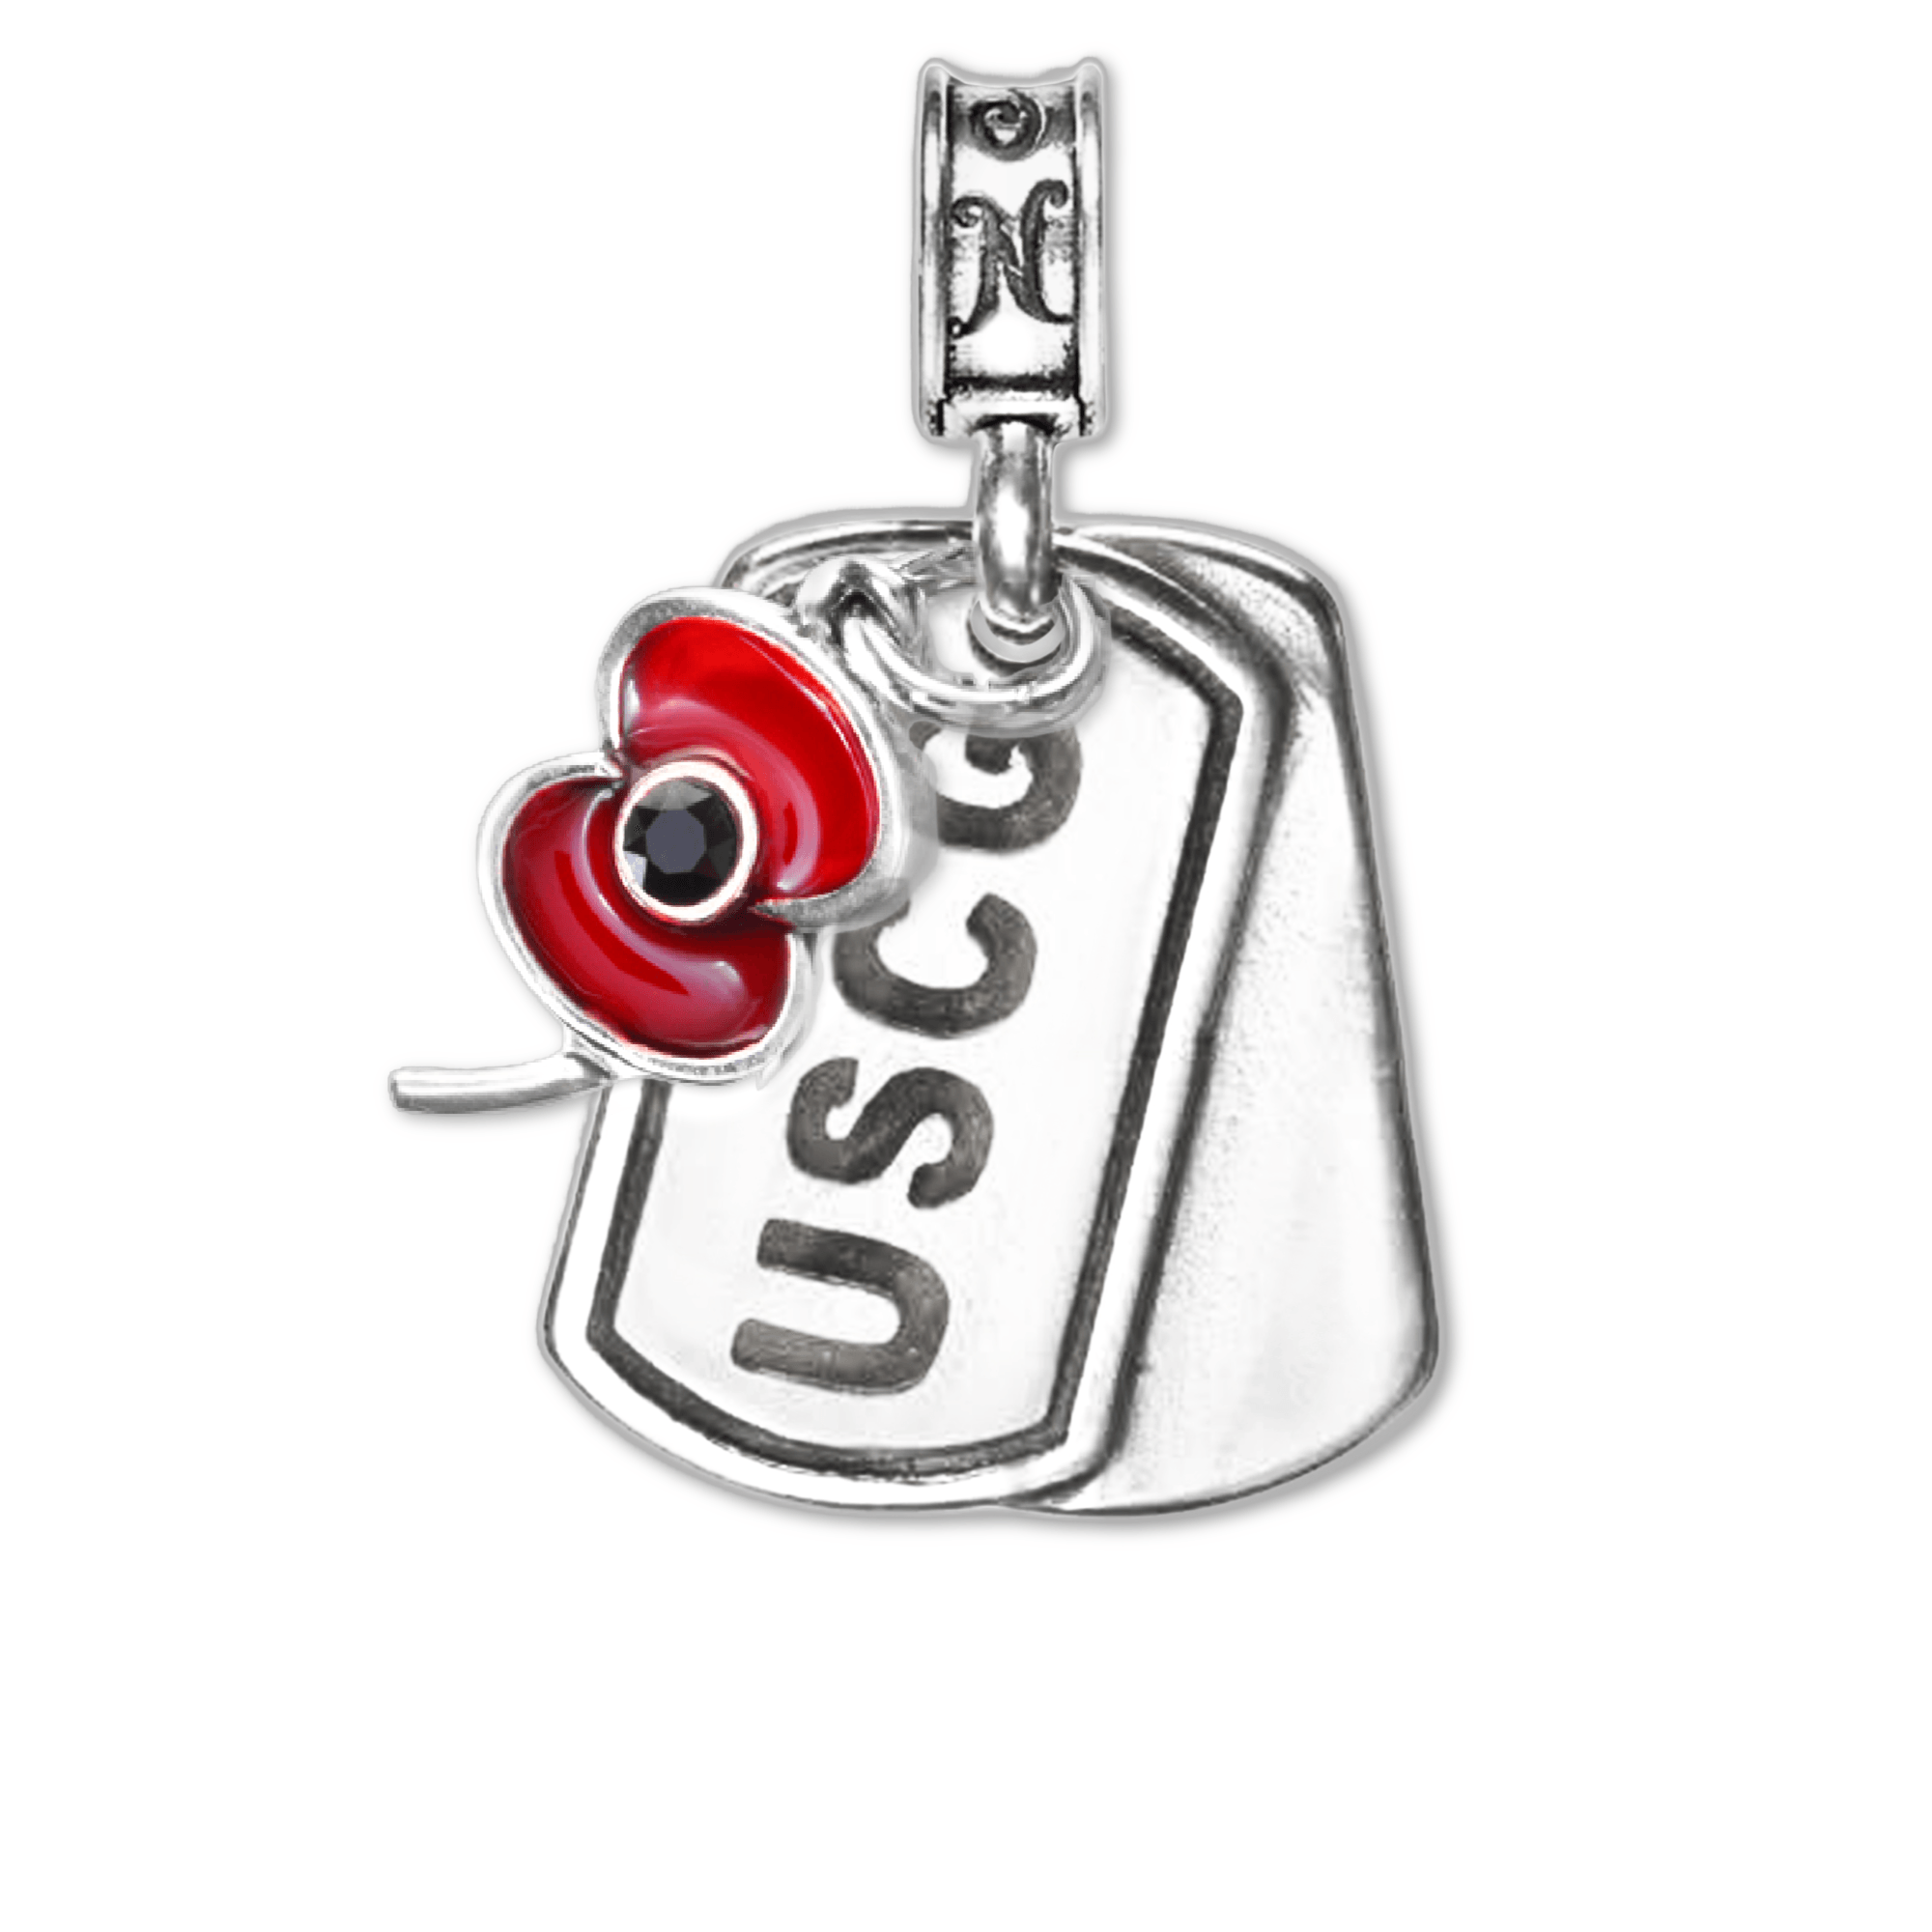 Military Jewelry, Military Charms, Military Gifts, United States Coast Guard, USCG American Legion